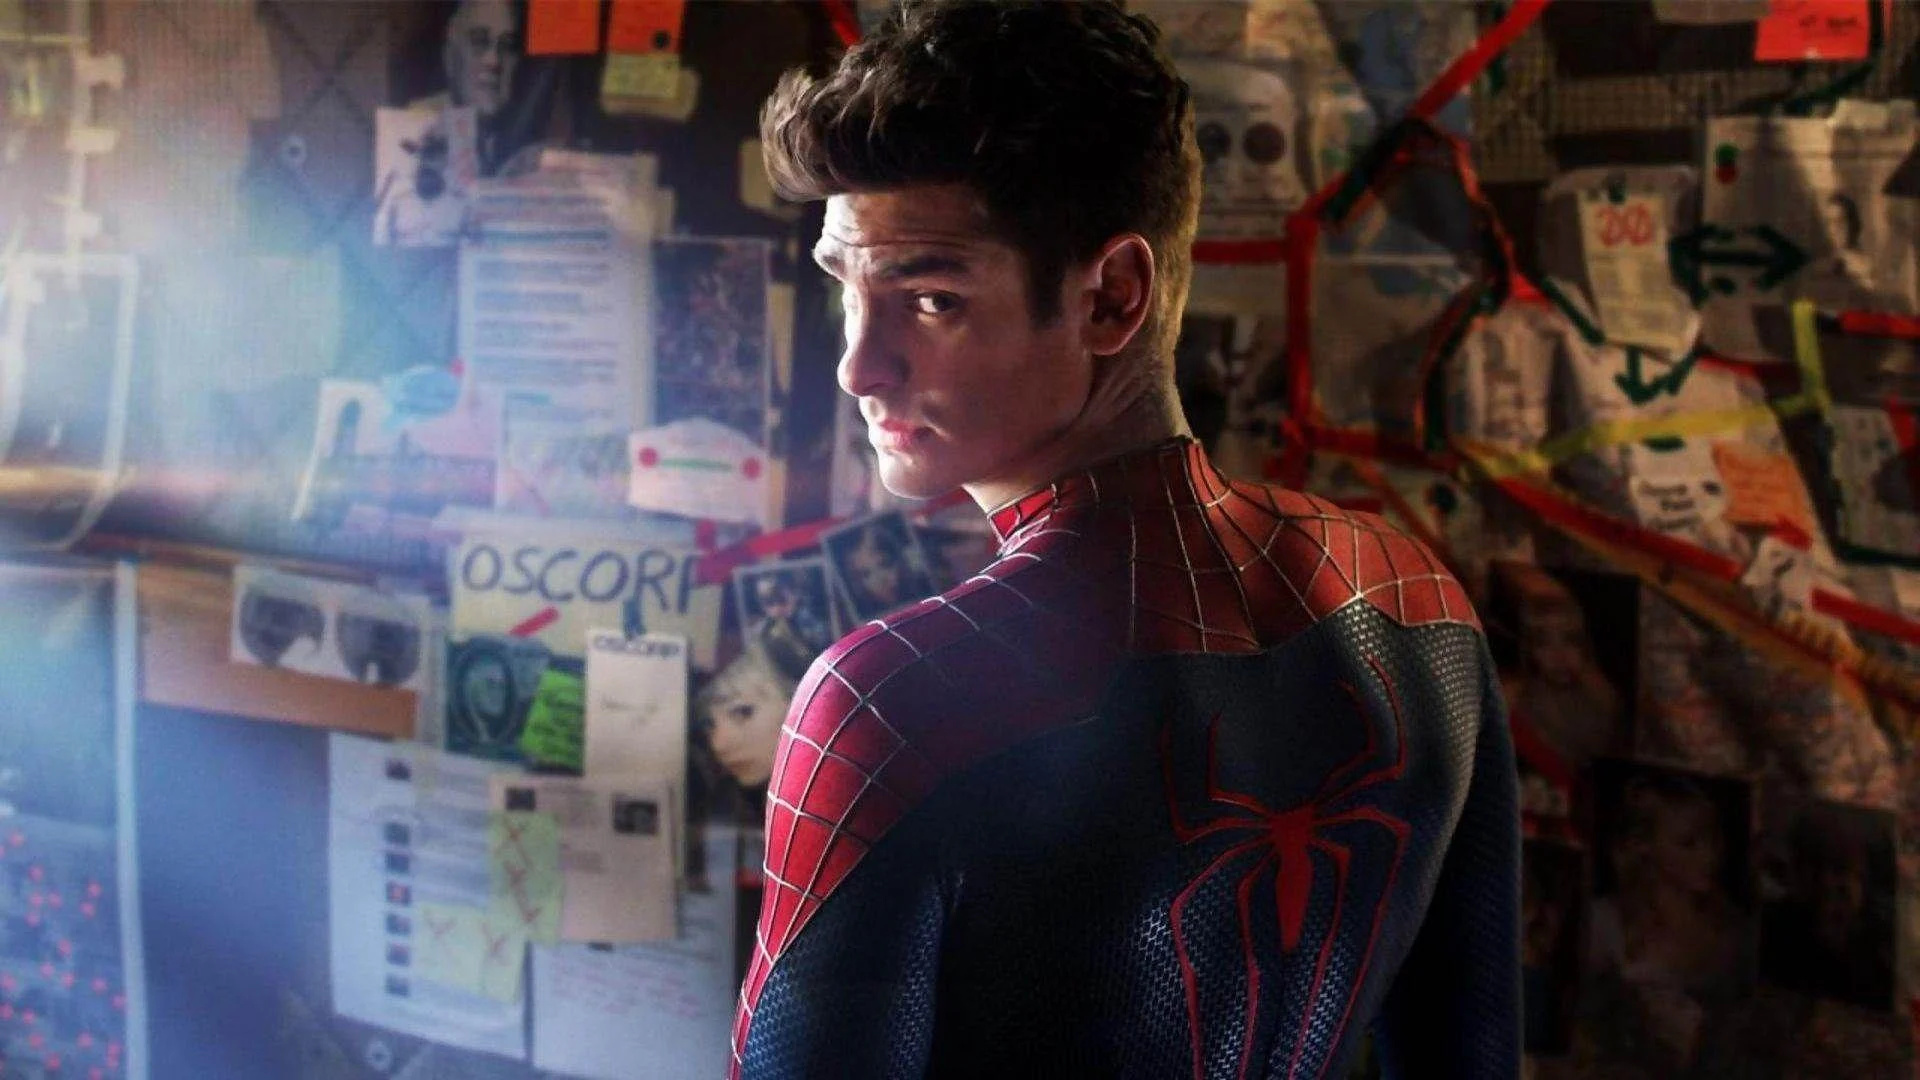 Andrew Garfield, Spider-Man wallpapers, Epic backgrounds, Movie magic, 1920x1080 Full HD Desktop